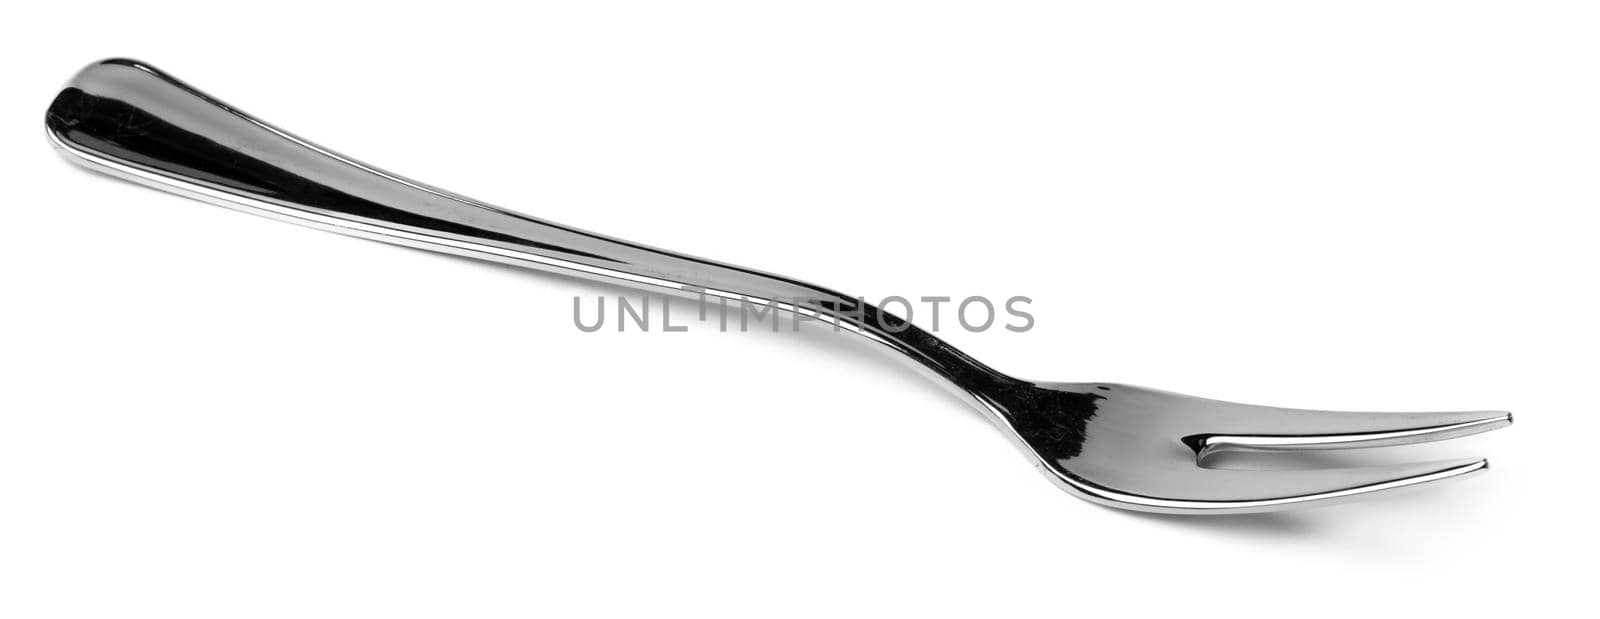 Fork with two prongs isolated on white background by Fabrikasimf